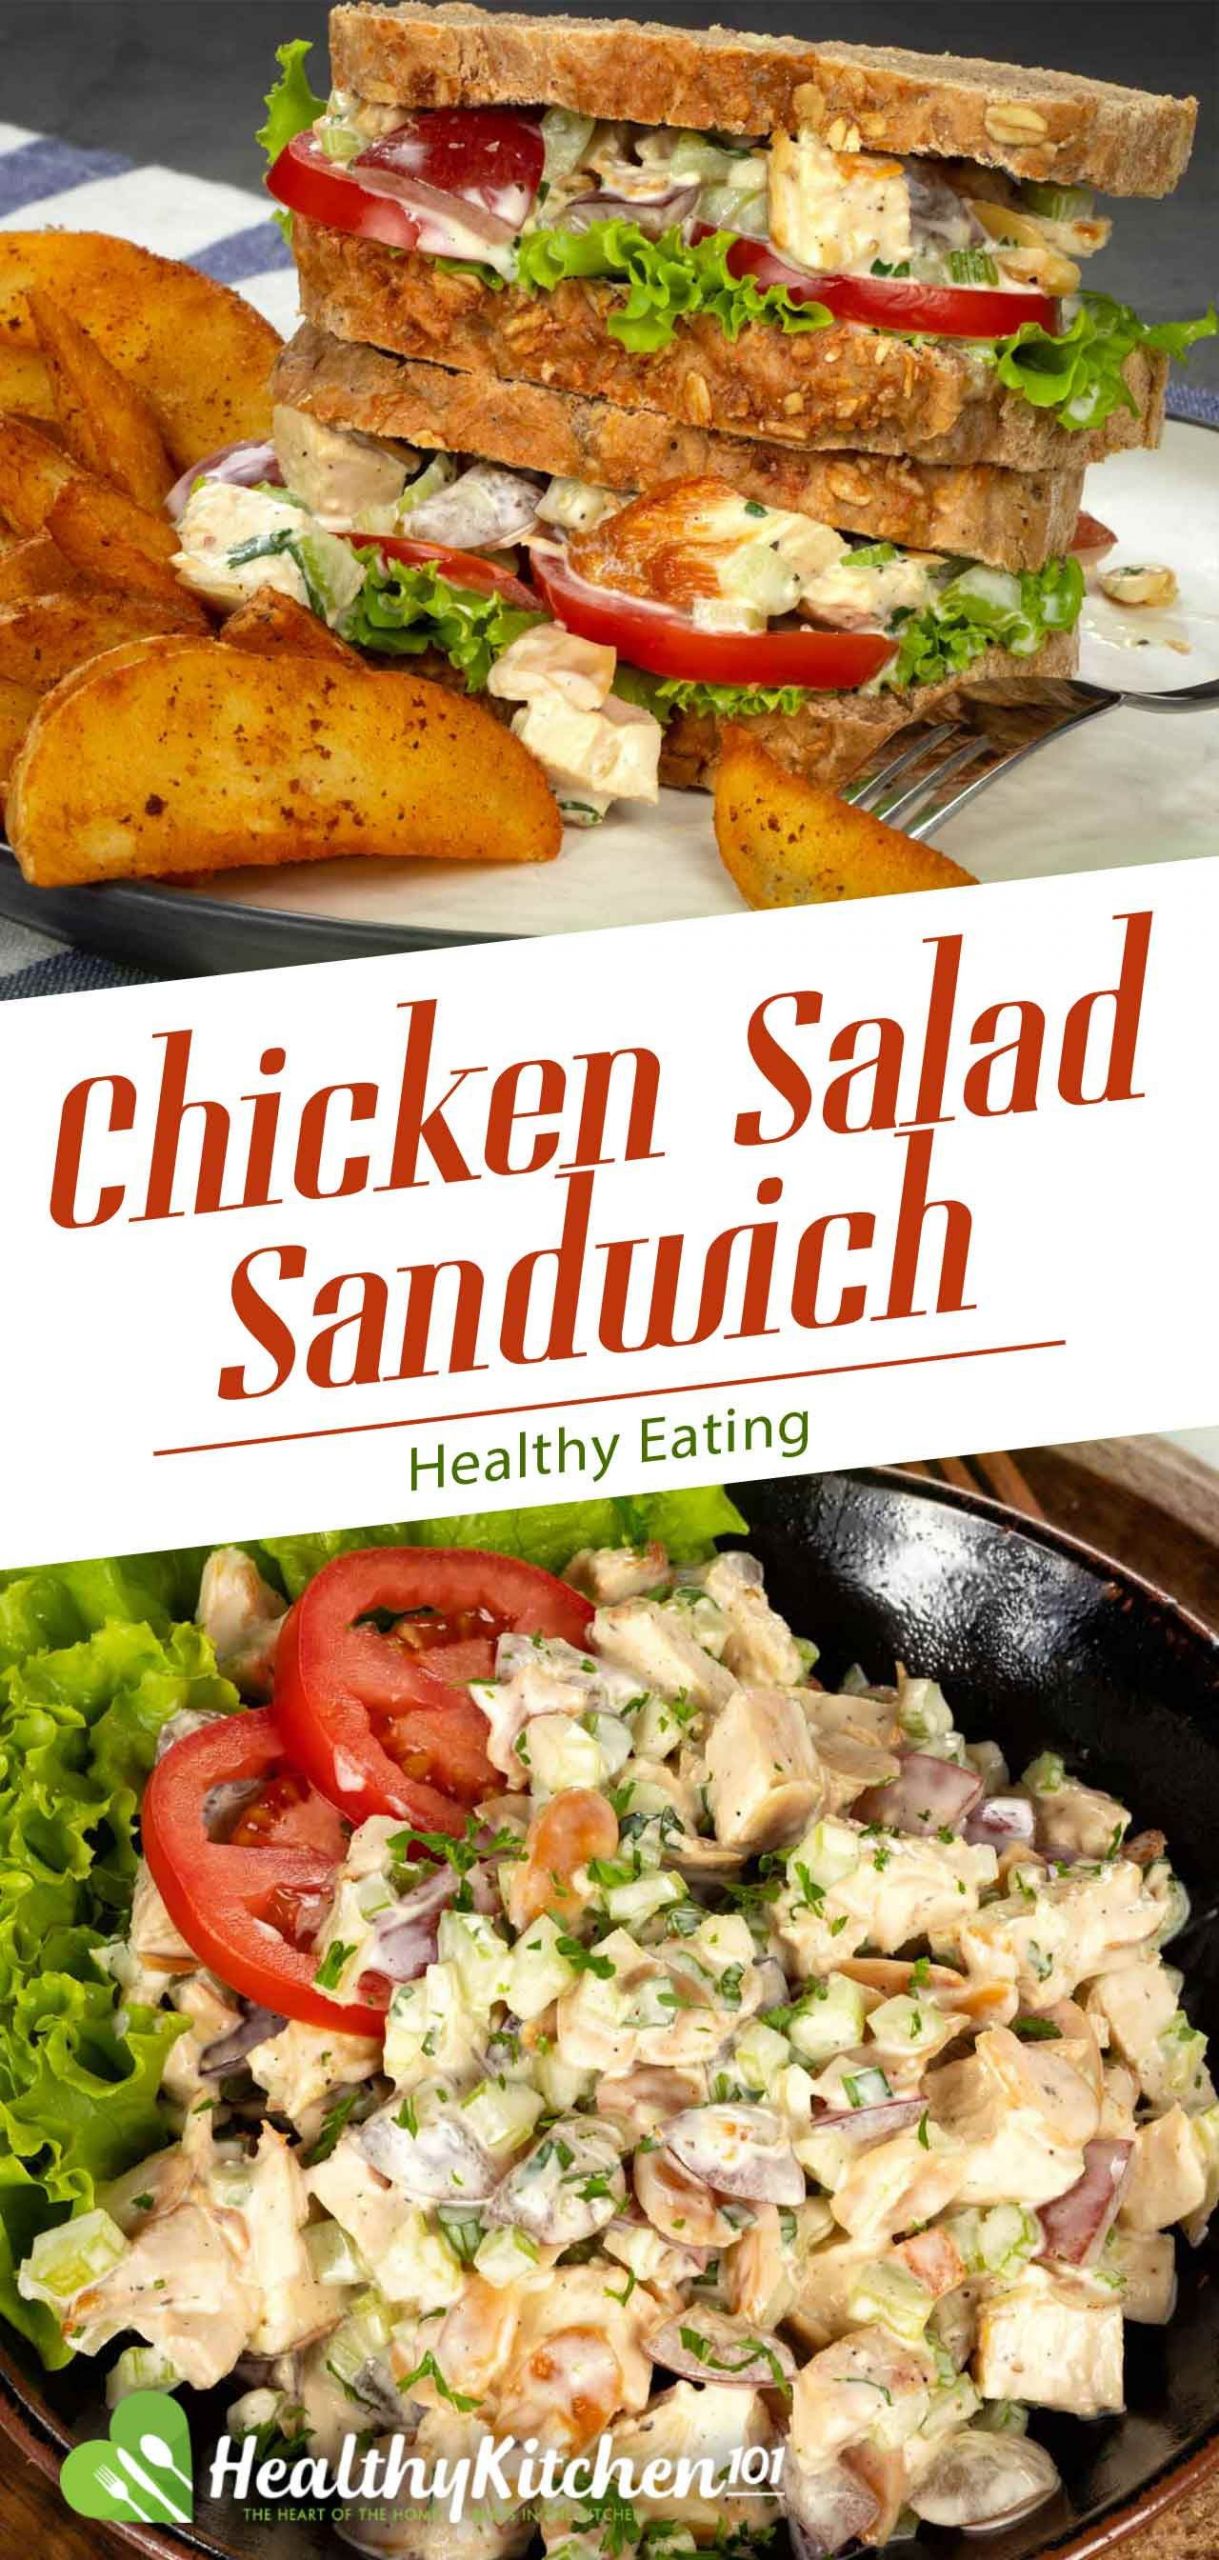 Healthy Side Dishes For Sandwiches
 Chicken salad sandwich recipe one of the easy and healthy